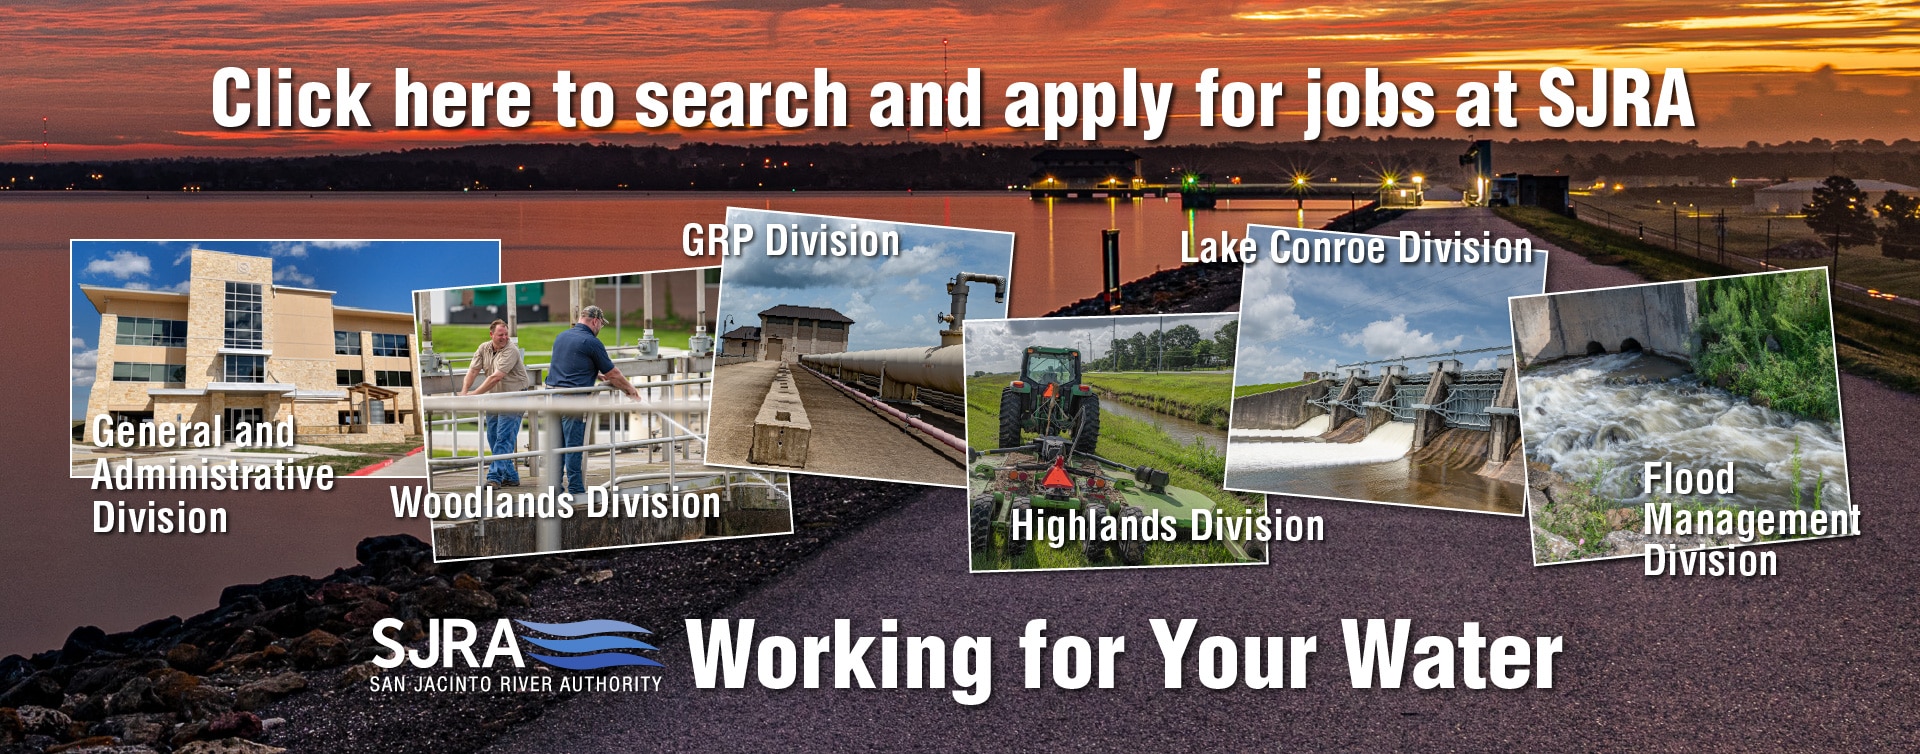 Search for Jobs at the San Jacinto River Authority